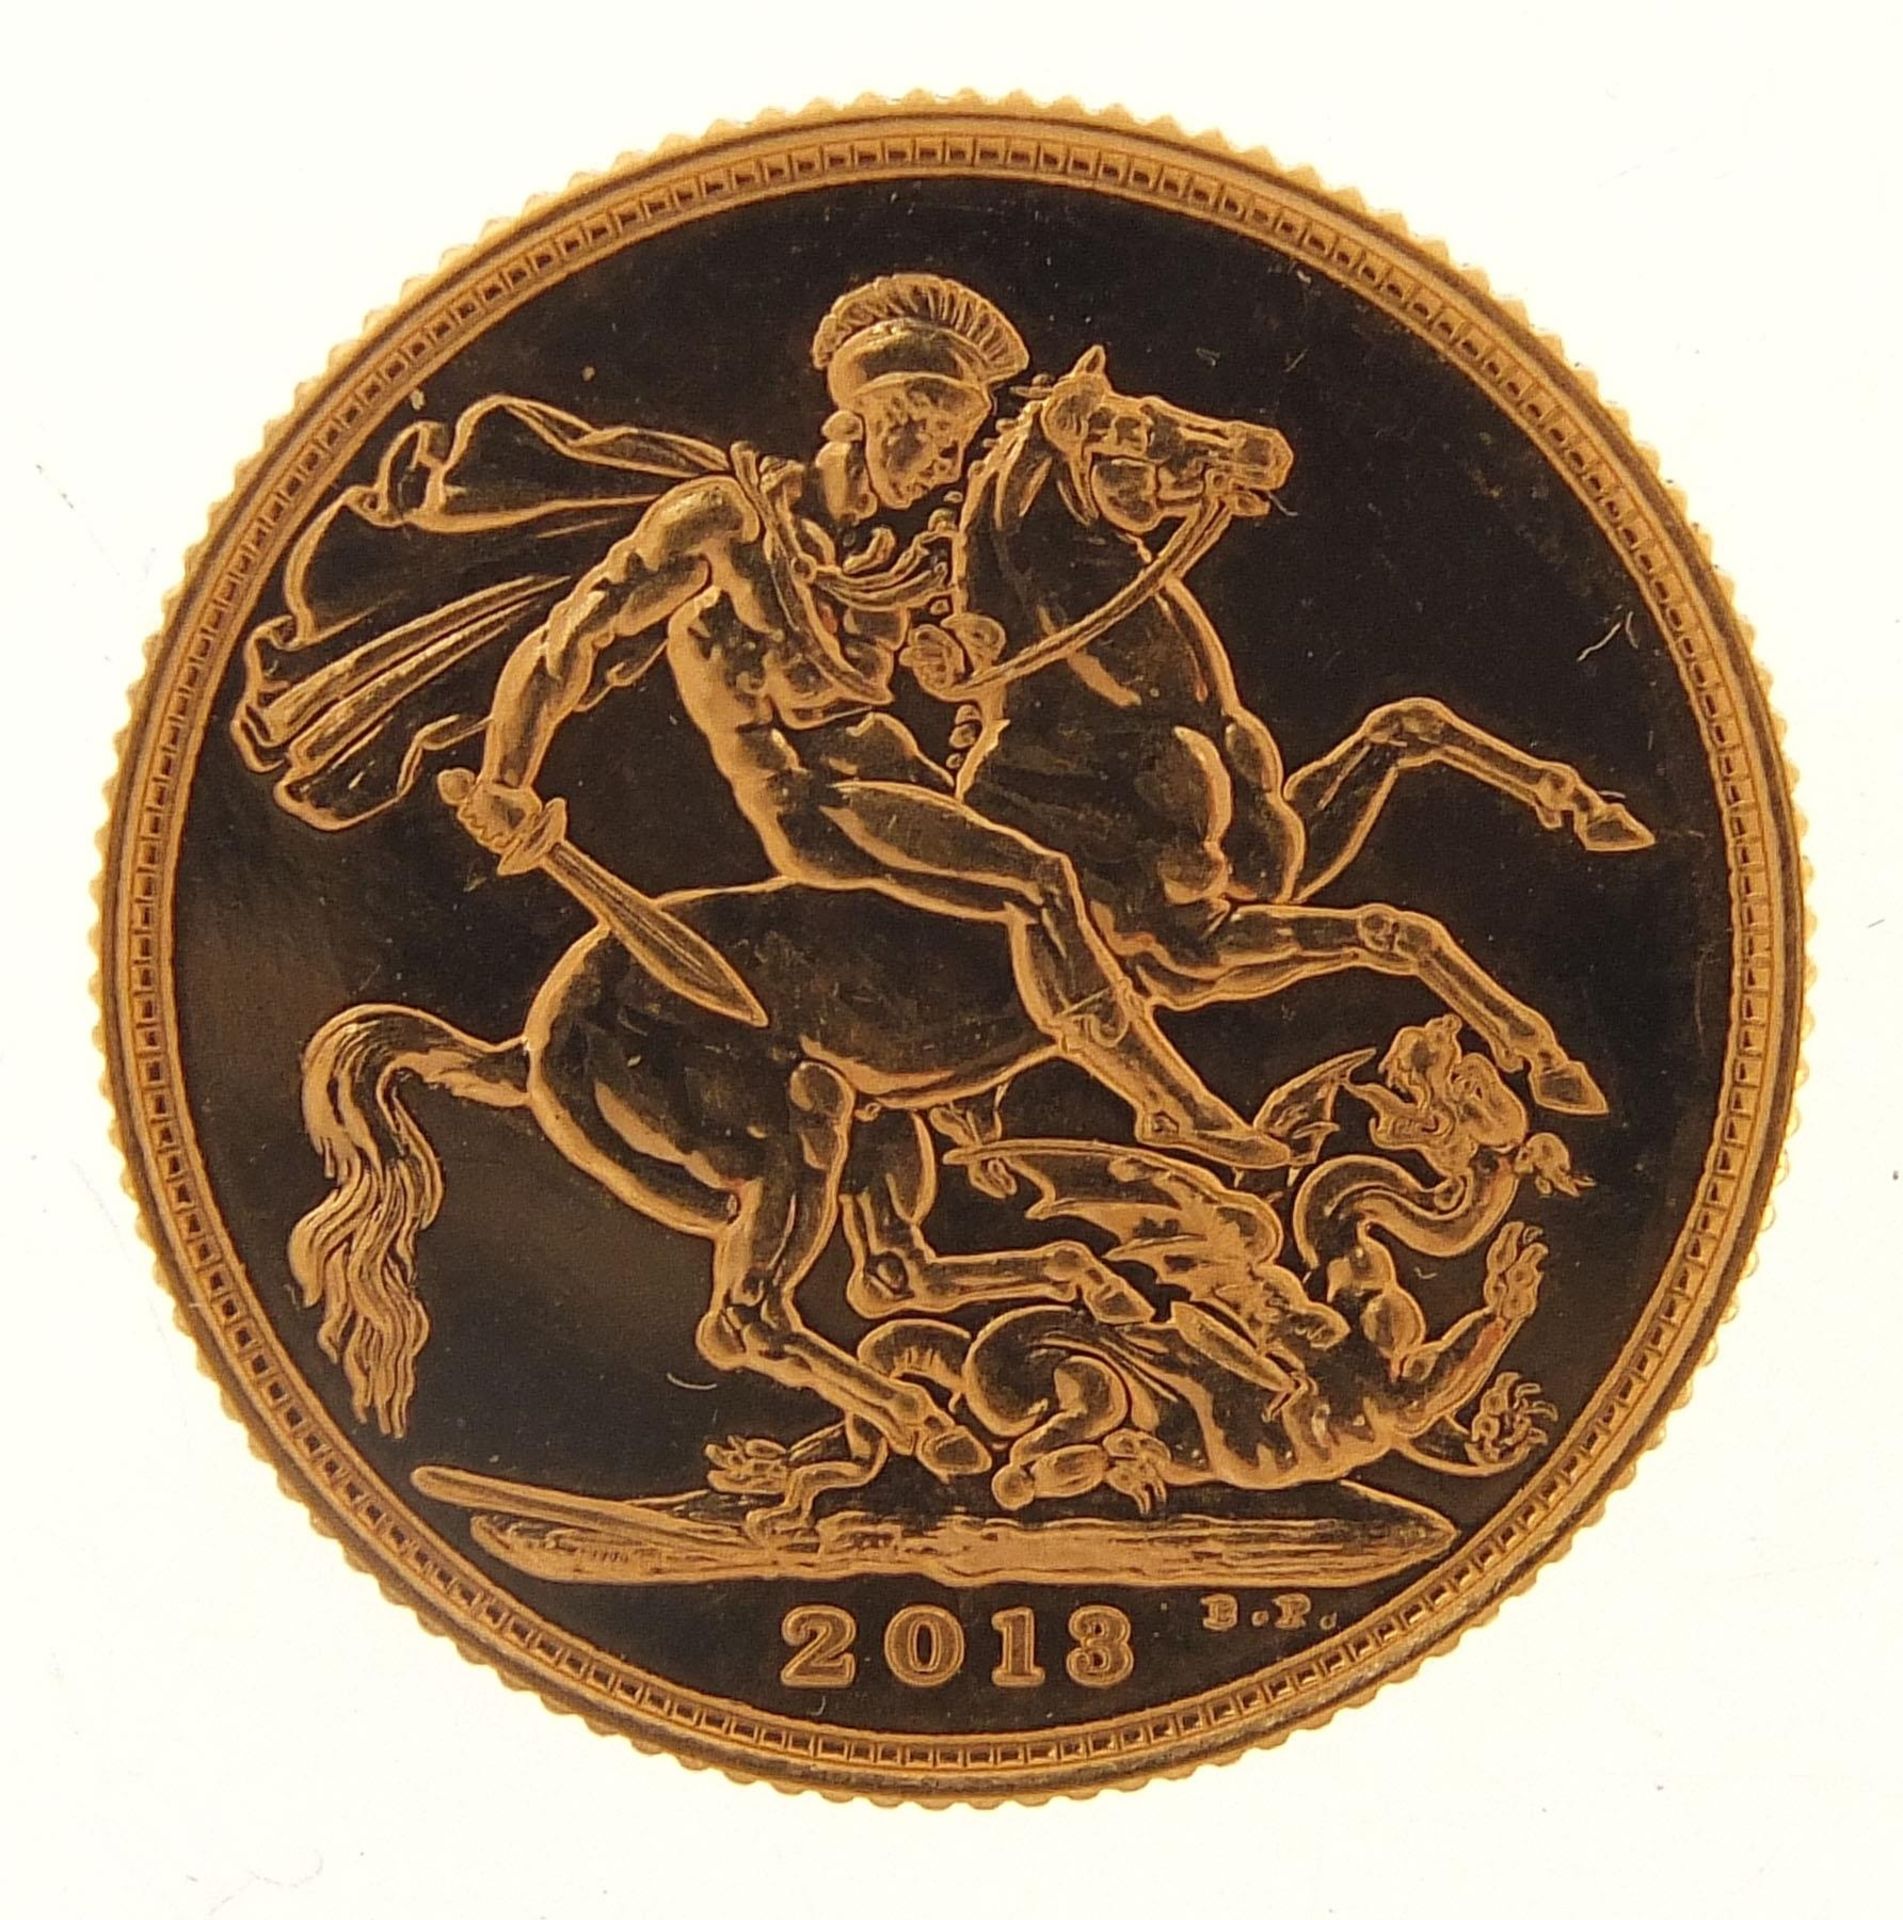 Elizabeth II 2013 gold sovereign - this lot is sold without buyer's premium